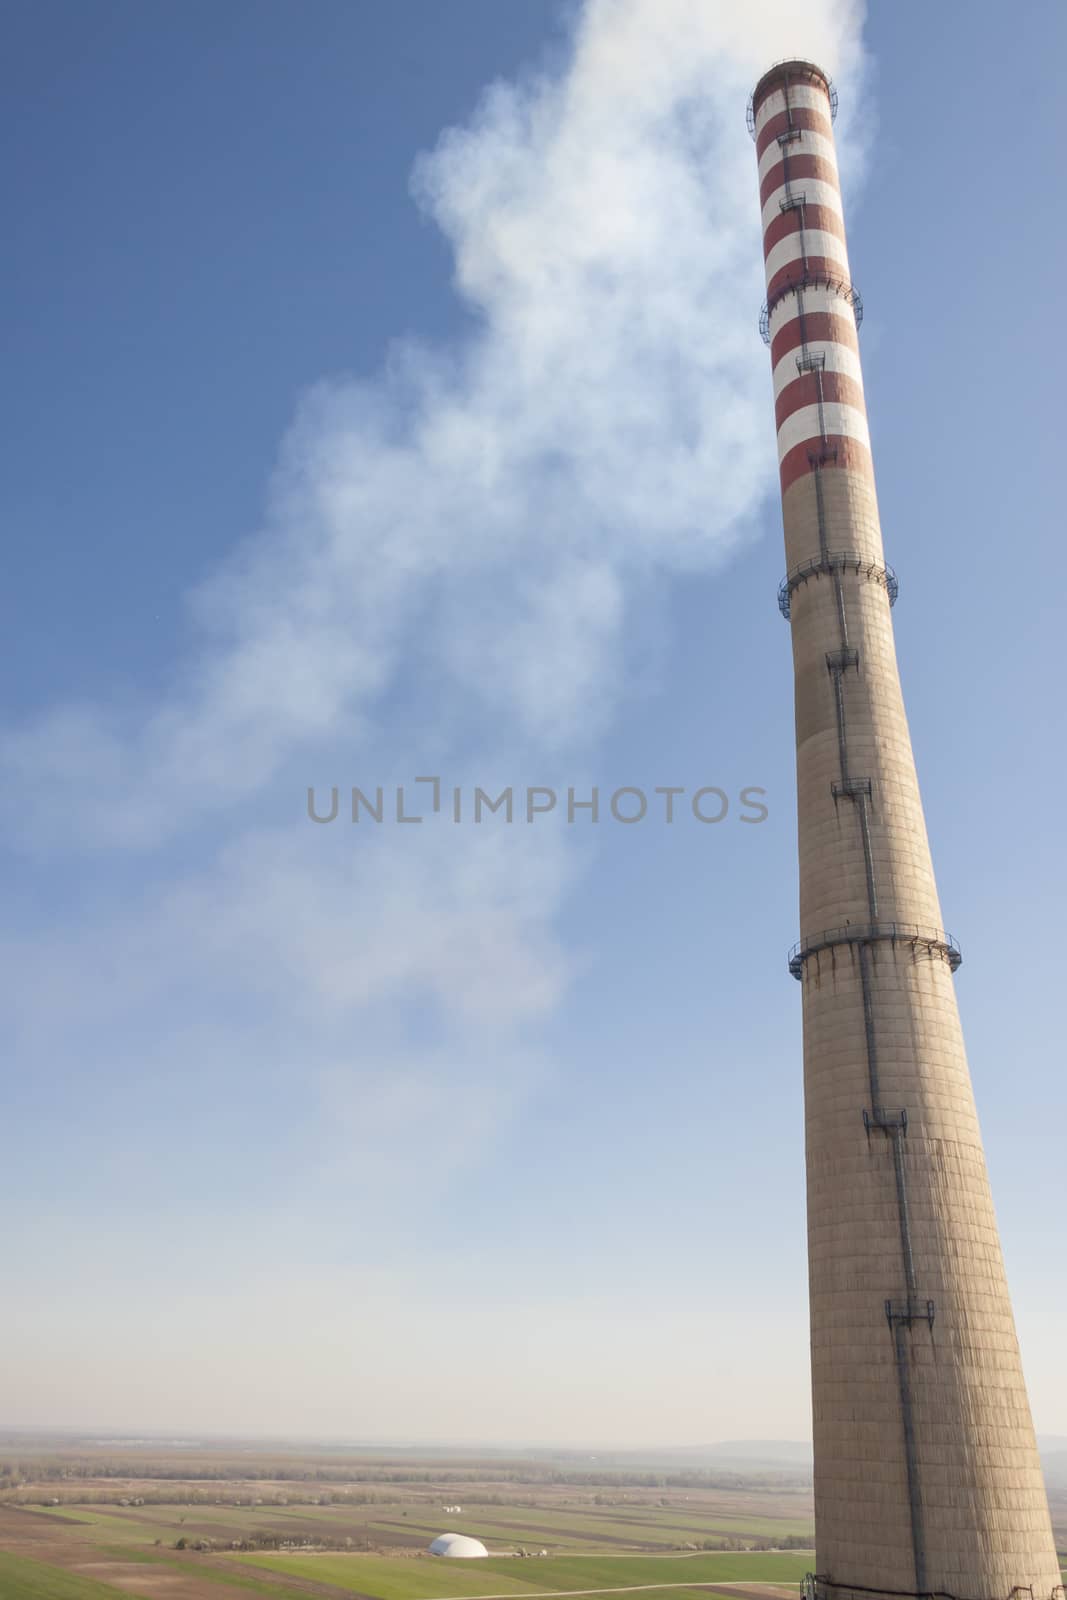 Thermal power station in Serbia - Kostolac. by parys